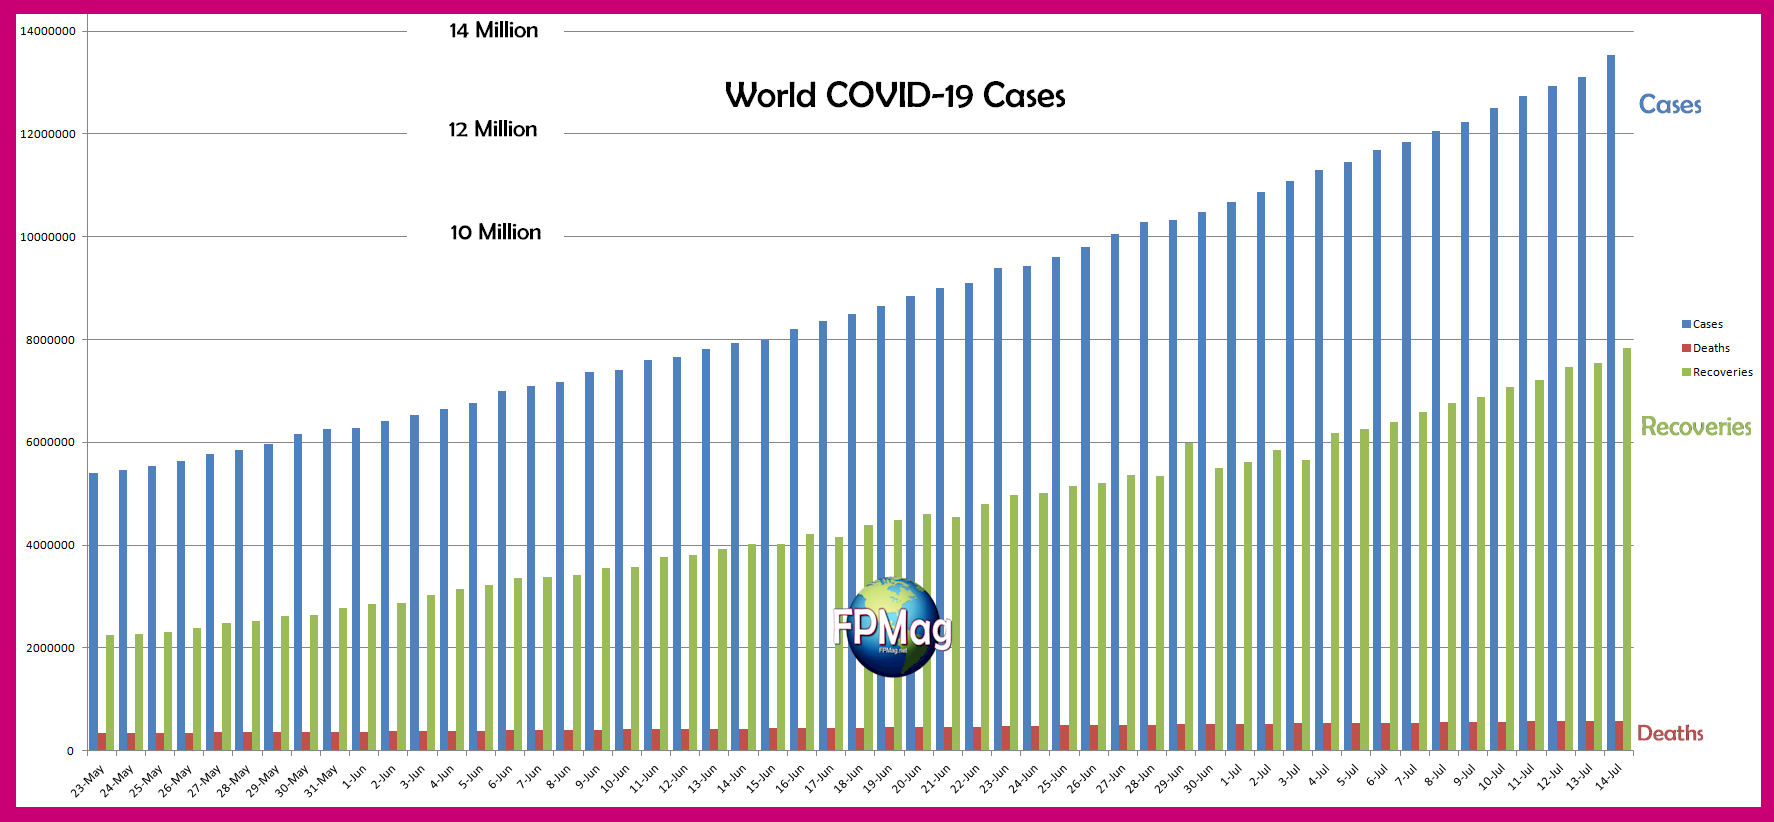 World COVID-19 Cases driven by United States failure of leadership